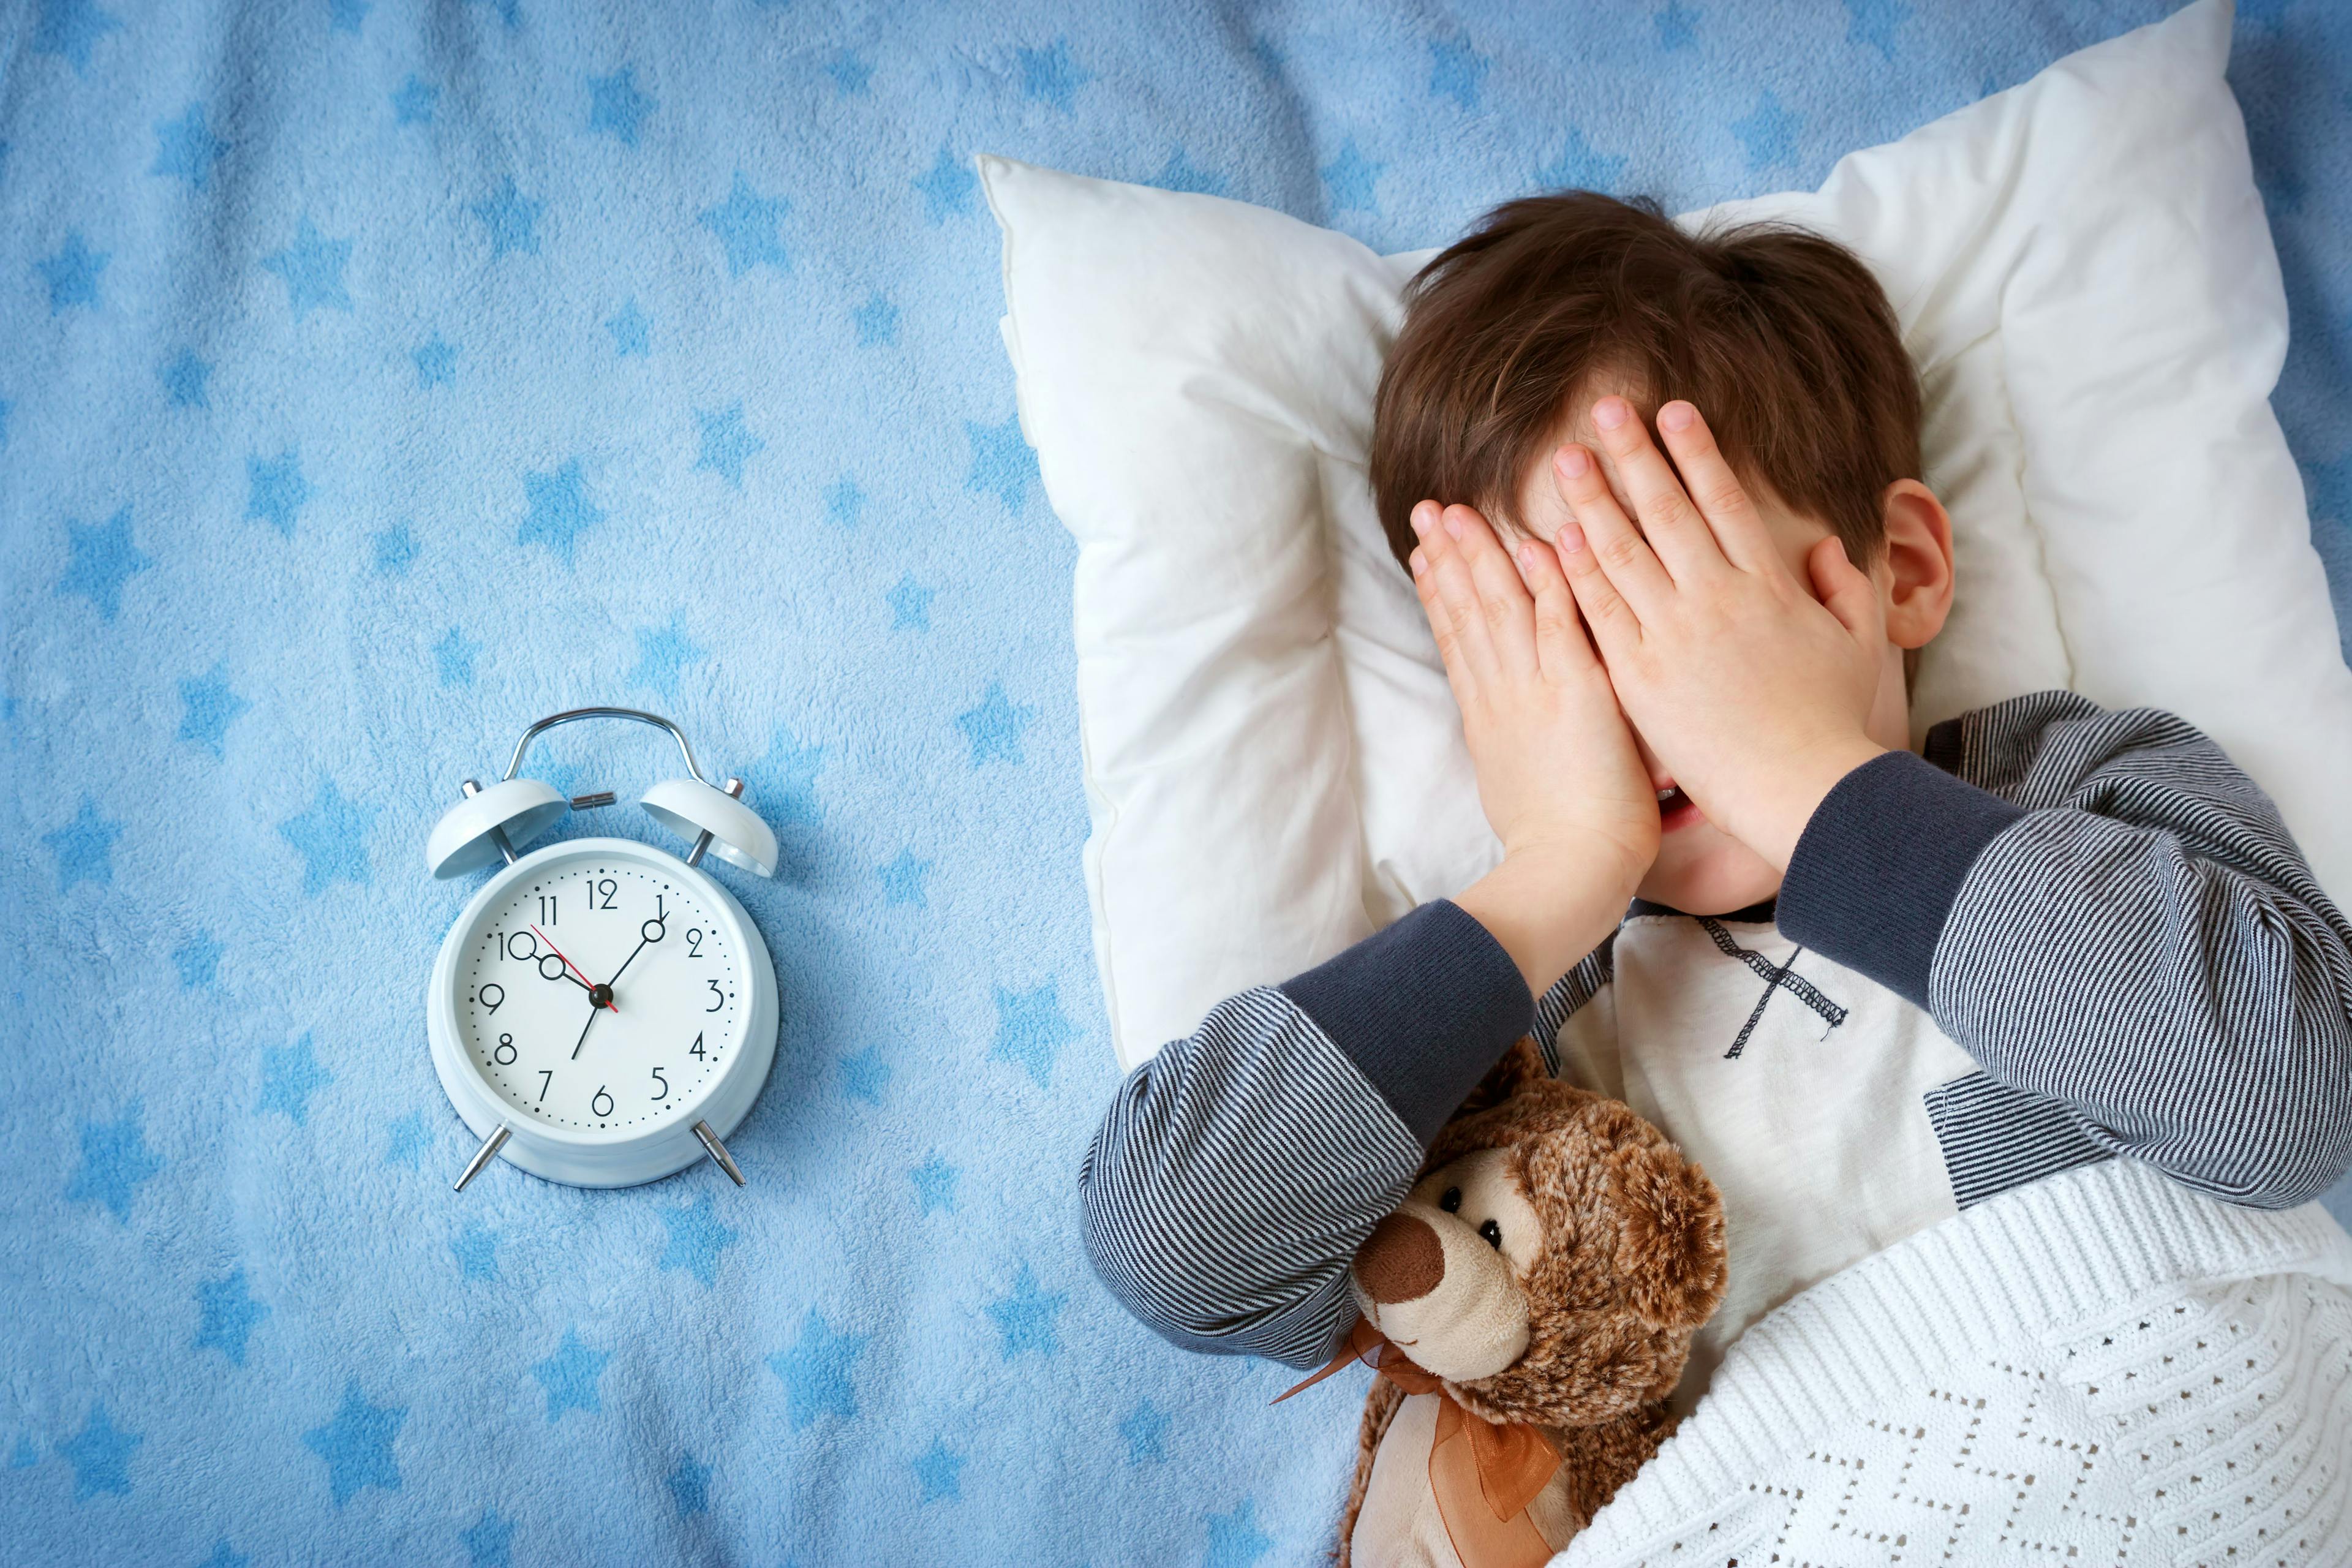 Although more than 90% of children had at least 1 caregiver-reported sleep problem, only 20% had a clinician-documented sleep problem.